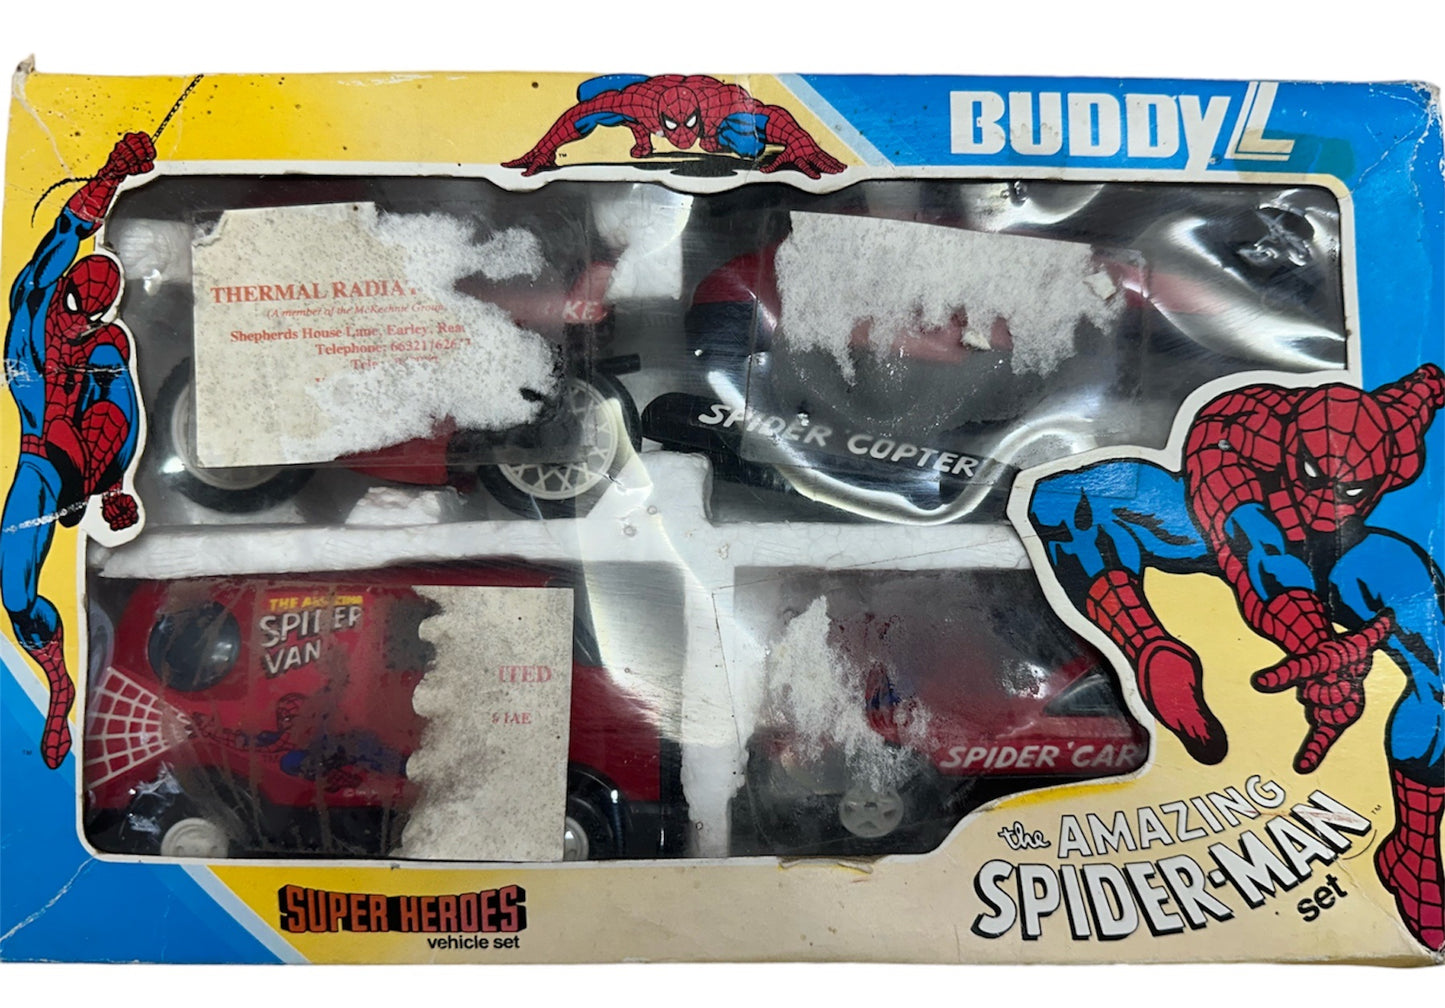 Vintage Buddy L 1982 The Amazing Spider Super Heroes Man Diecast Vehicle Set - Includes Bike, Car, Van & Copter - Fantastic Condition In The Original Box